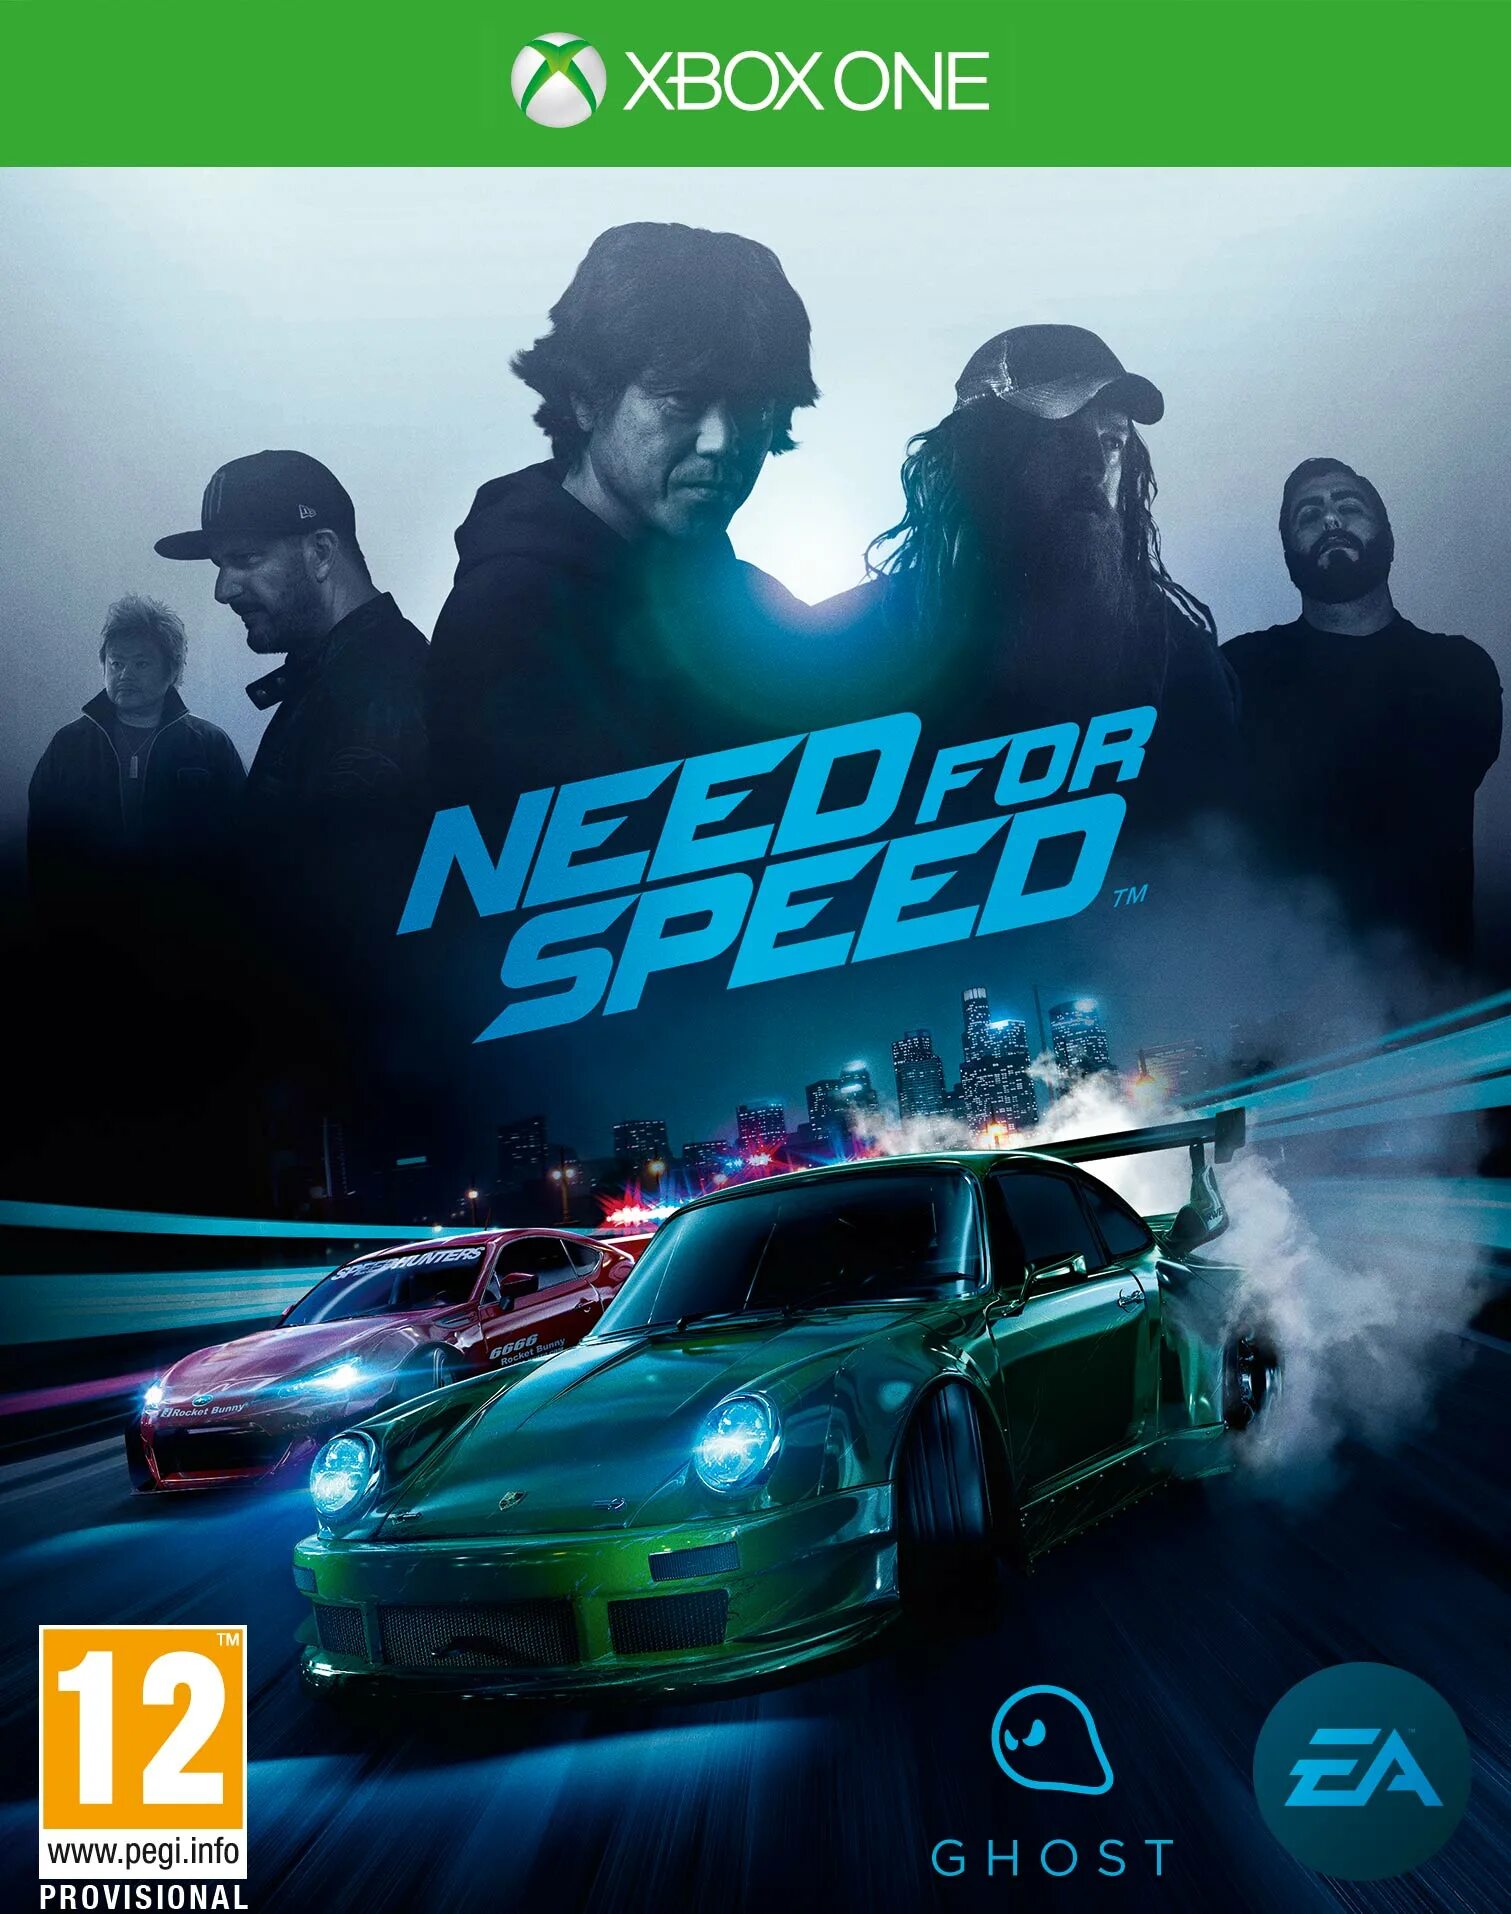 NFS на ПС 4. Need for Speed ps4 диск. NFS 2015 ps4. Need for Speed (игра, 2015). Нид фор спид пс